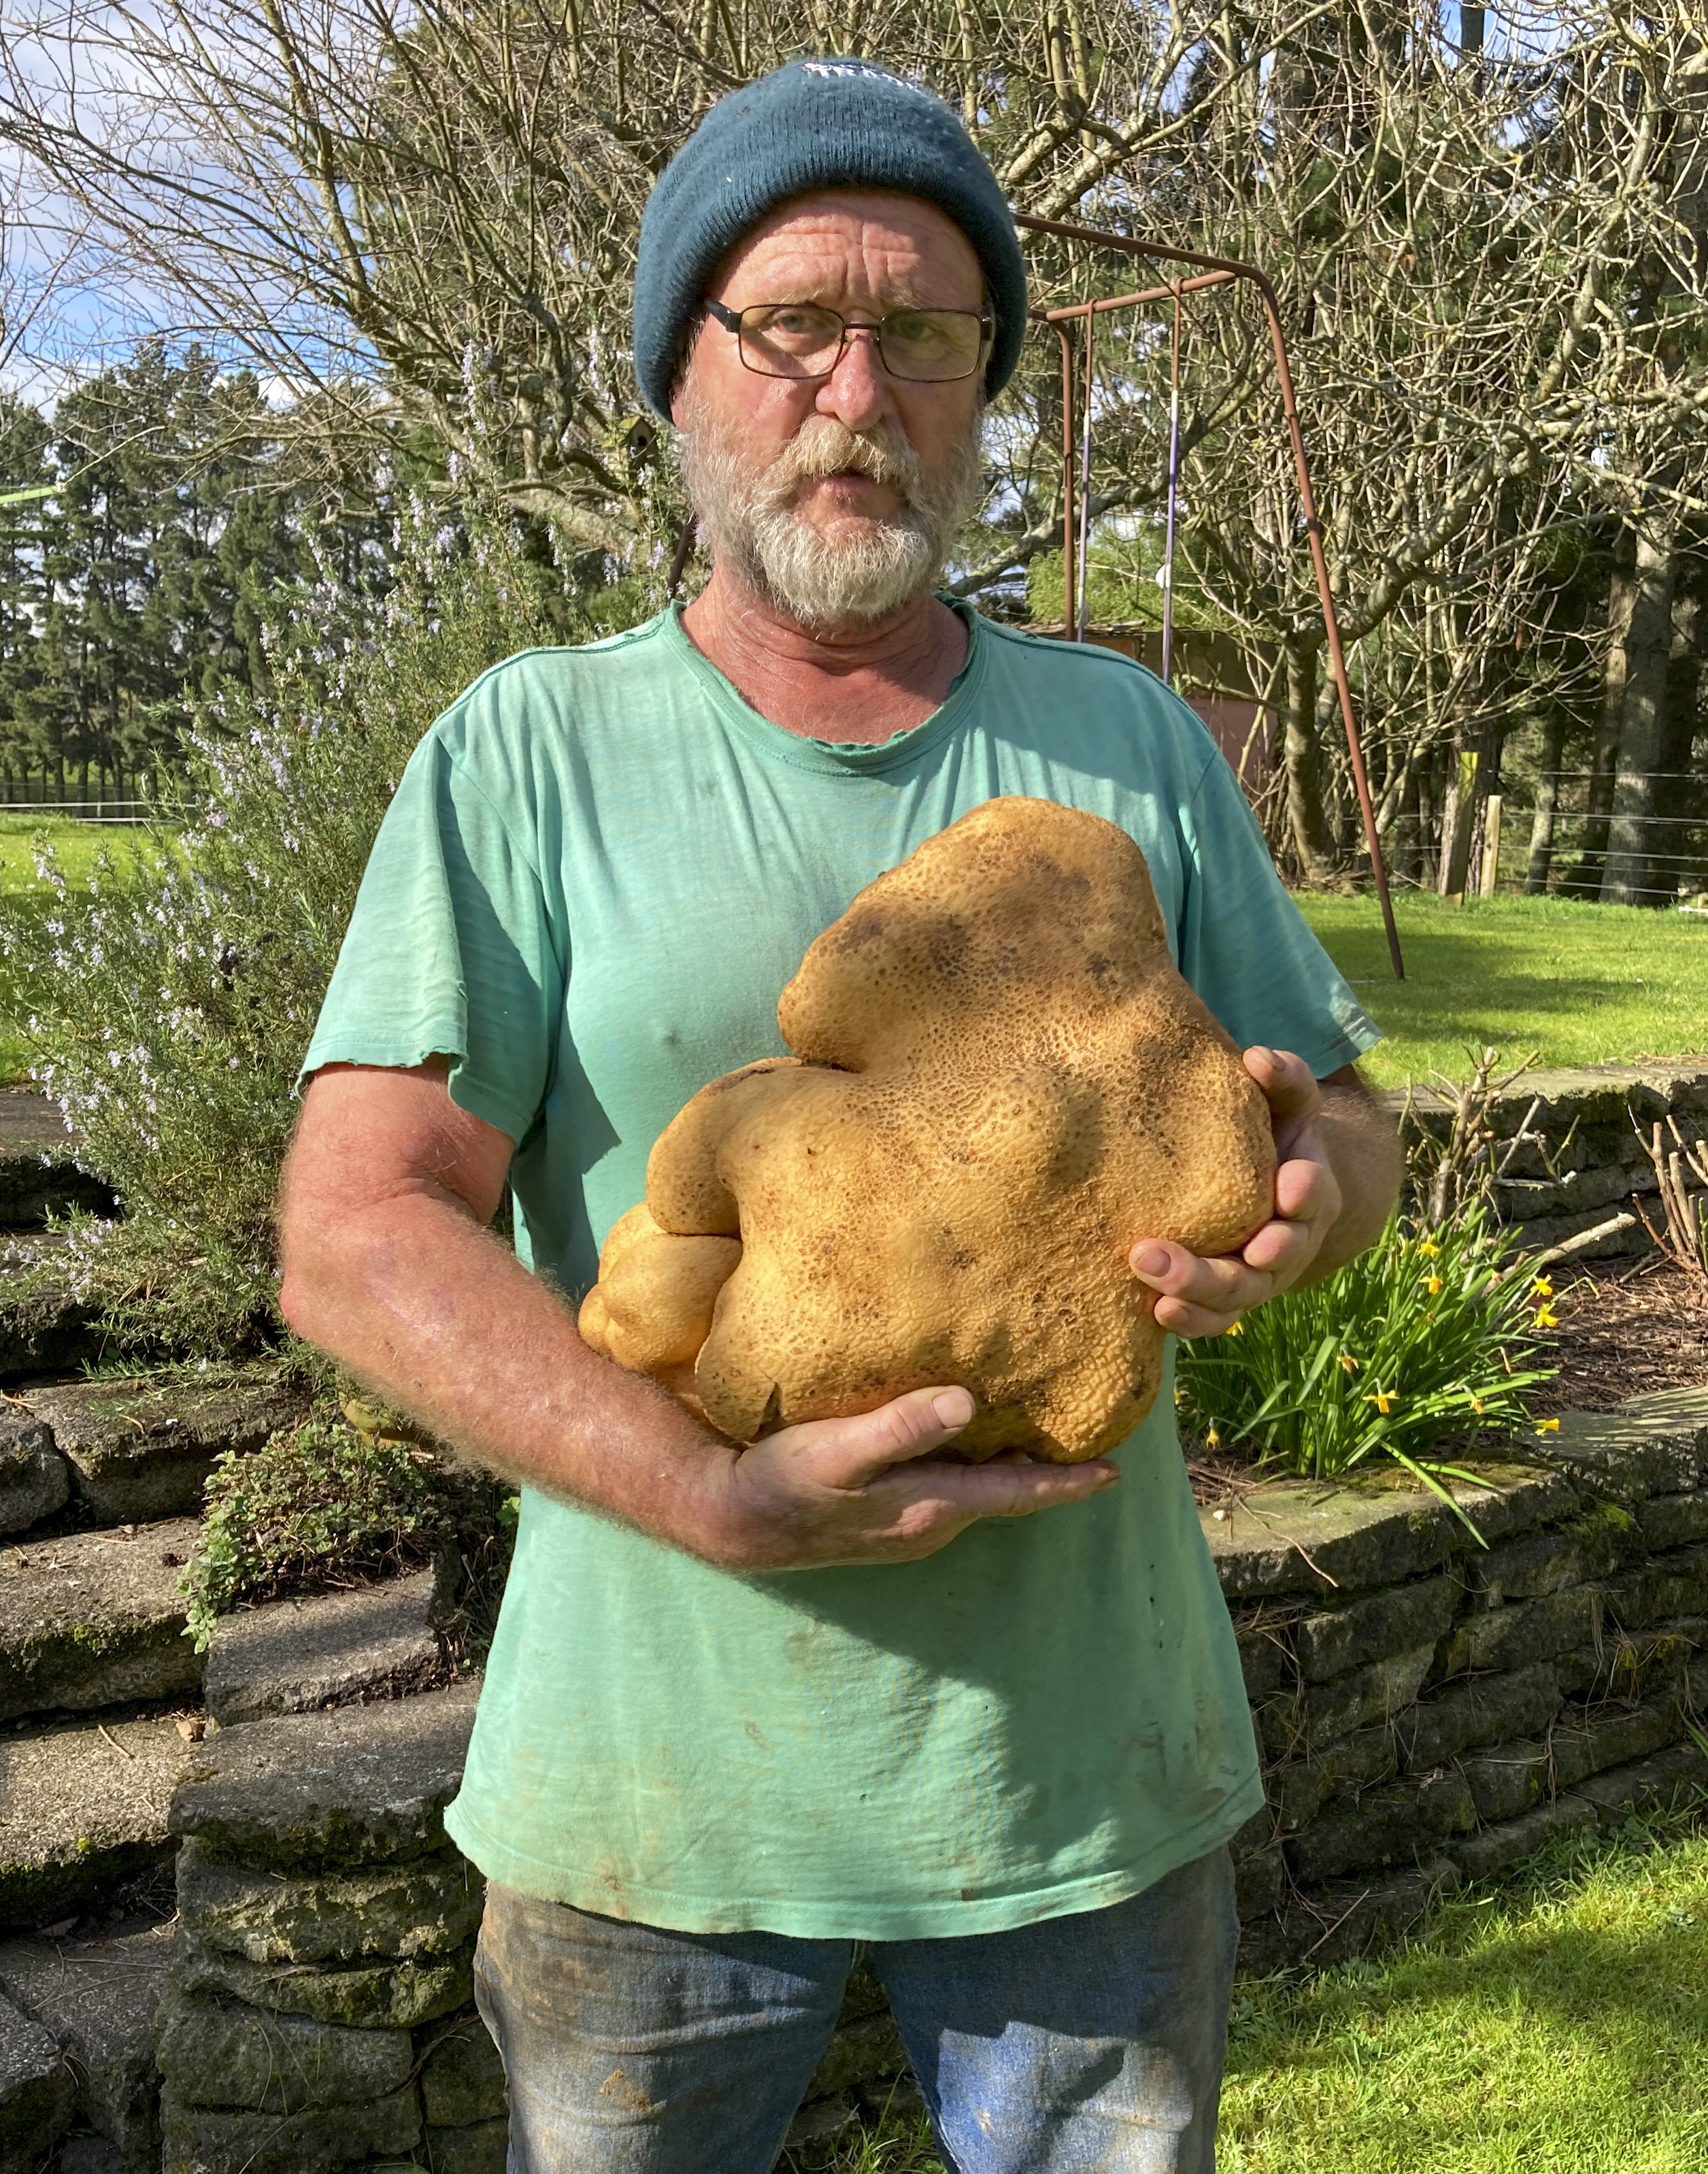 Colin Craig-Browns holds a large potato dug from his garden at his home near Hamilton, New Zealand. 